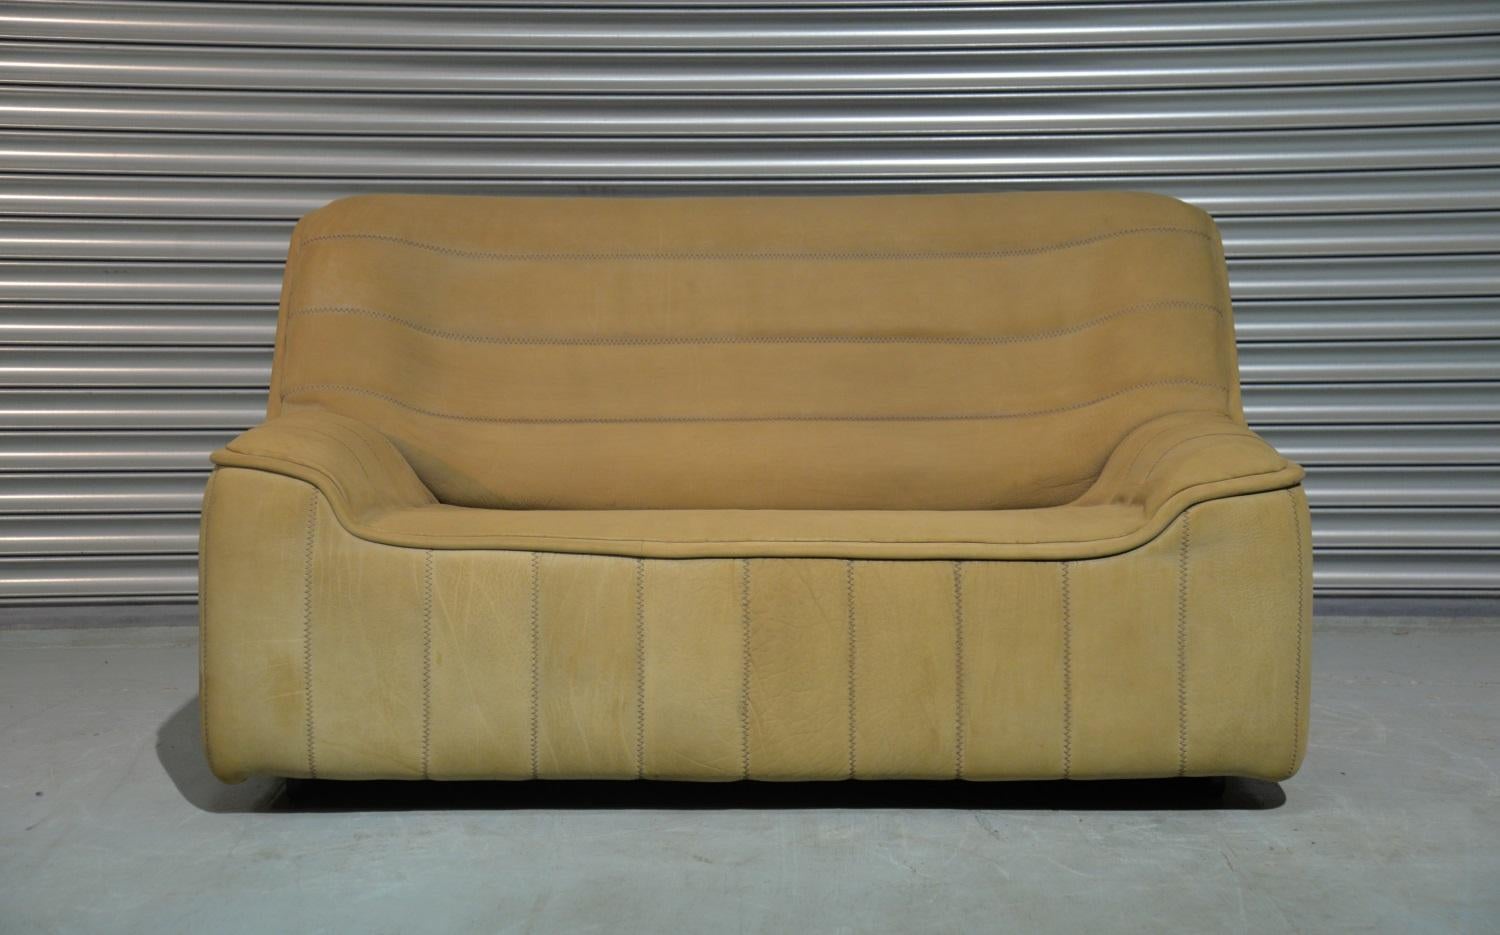 Discounted airfreight for our US and International customers (from 2 weeks door to door).

We are delighted to bring to you an ultra rare vintage De Sede DS 84 sofa. Hand built in the 1970s by De Sede craftsman in Switzerland, this piece is